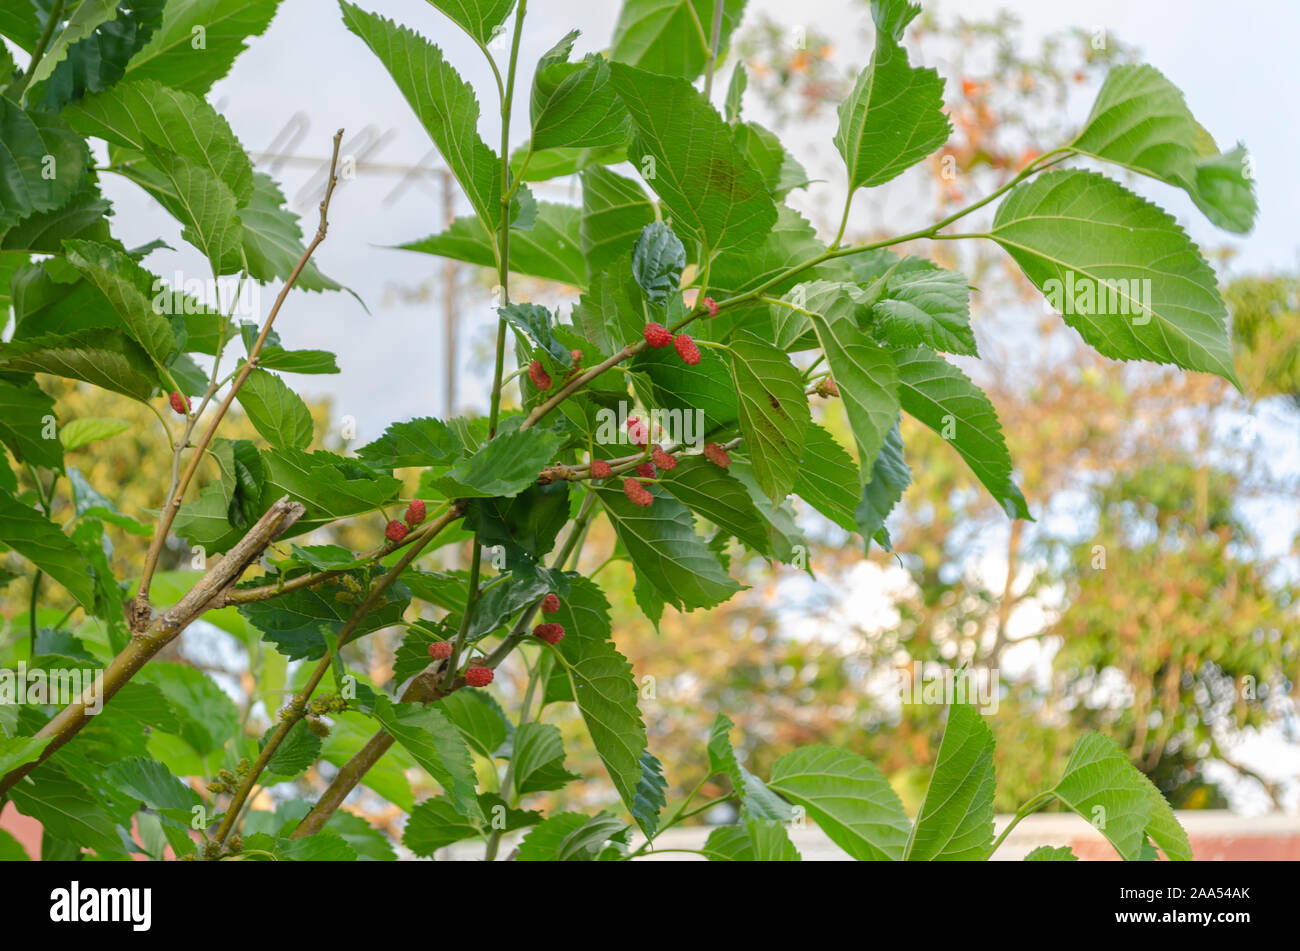 Branches With Mulberry Fruits Stock Photo